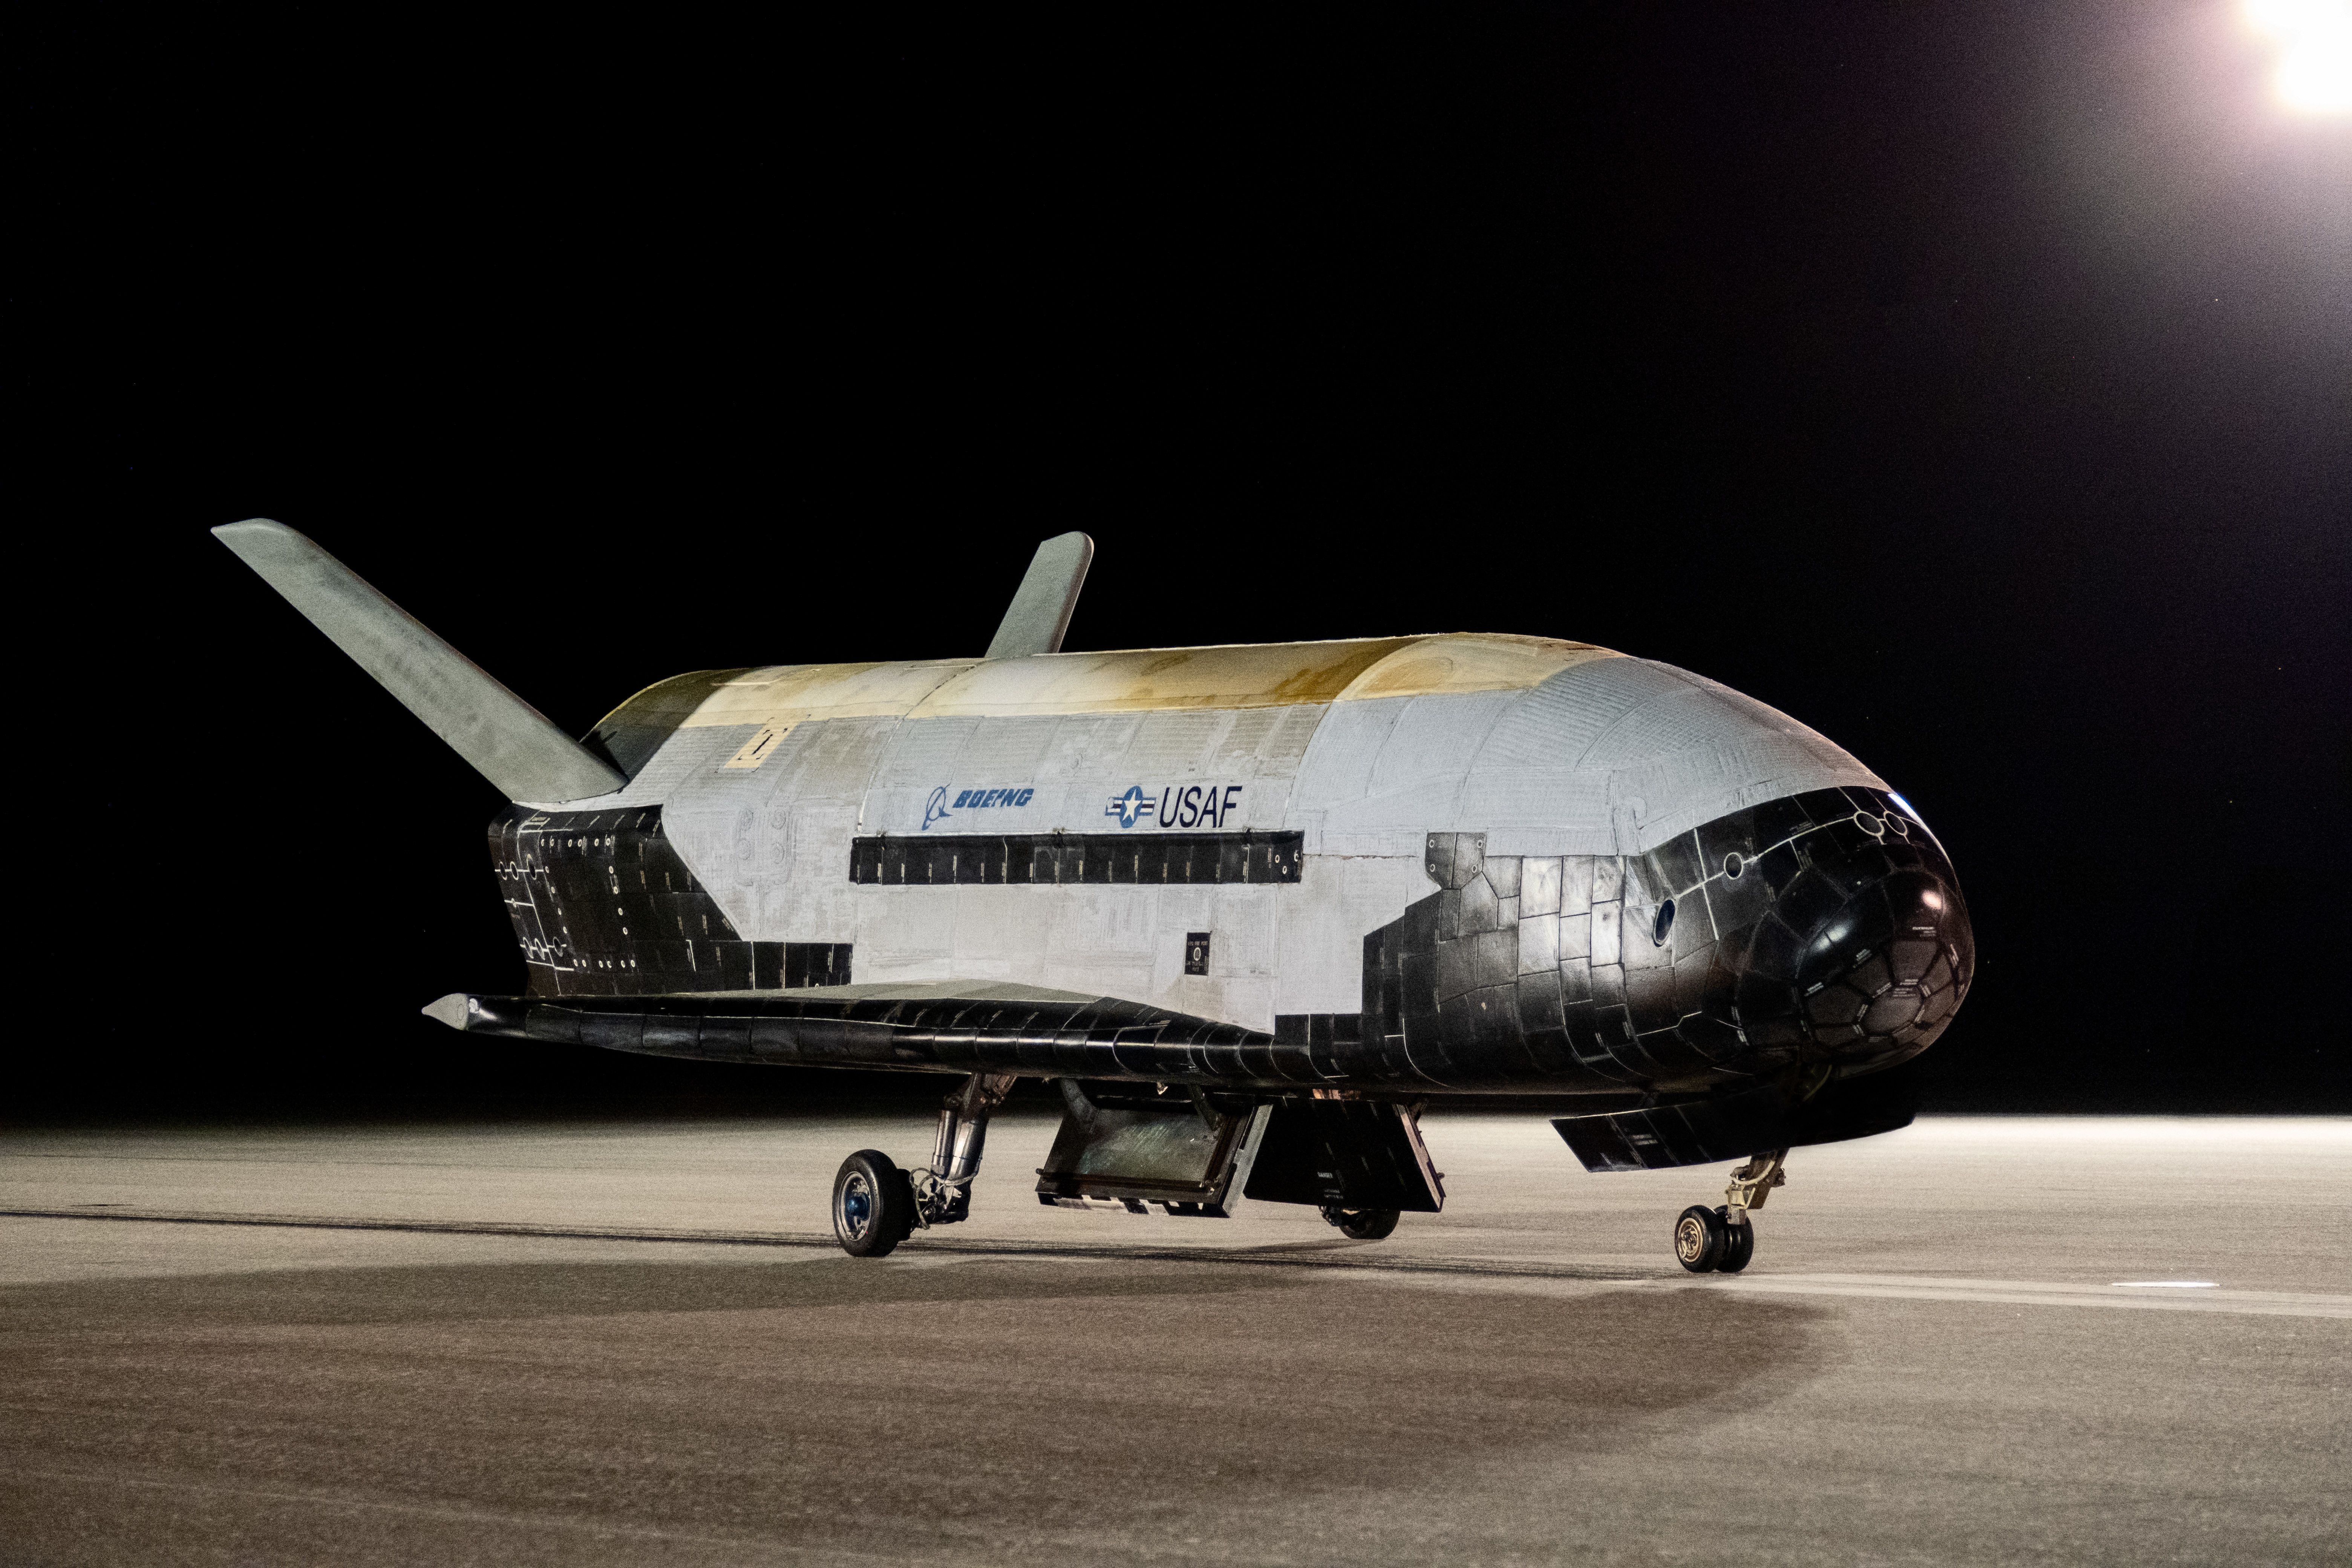 NASA's Boeing X-37 parked on the ground.